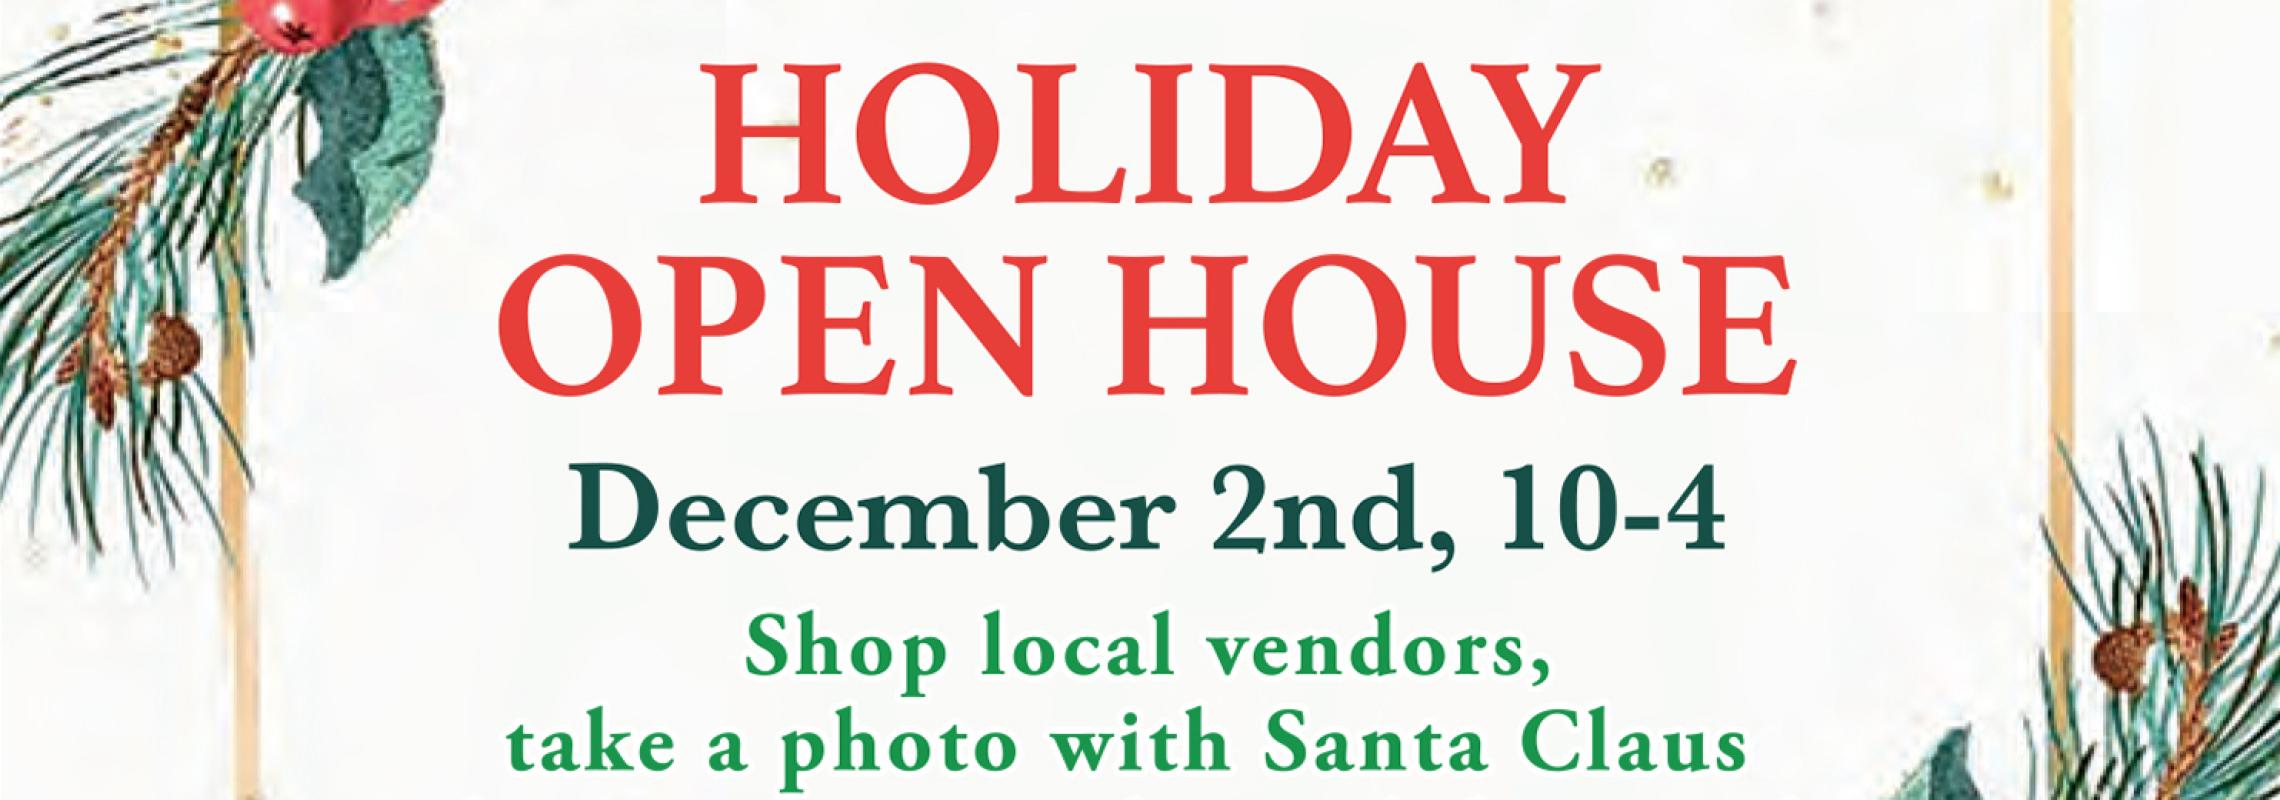 Holiday Open House Richard Bookstore at SHSMO 